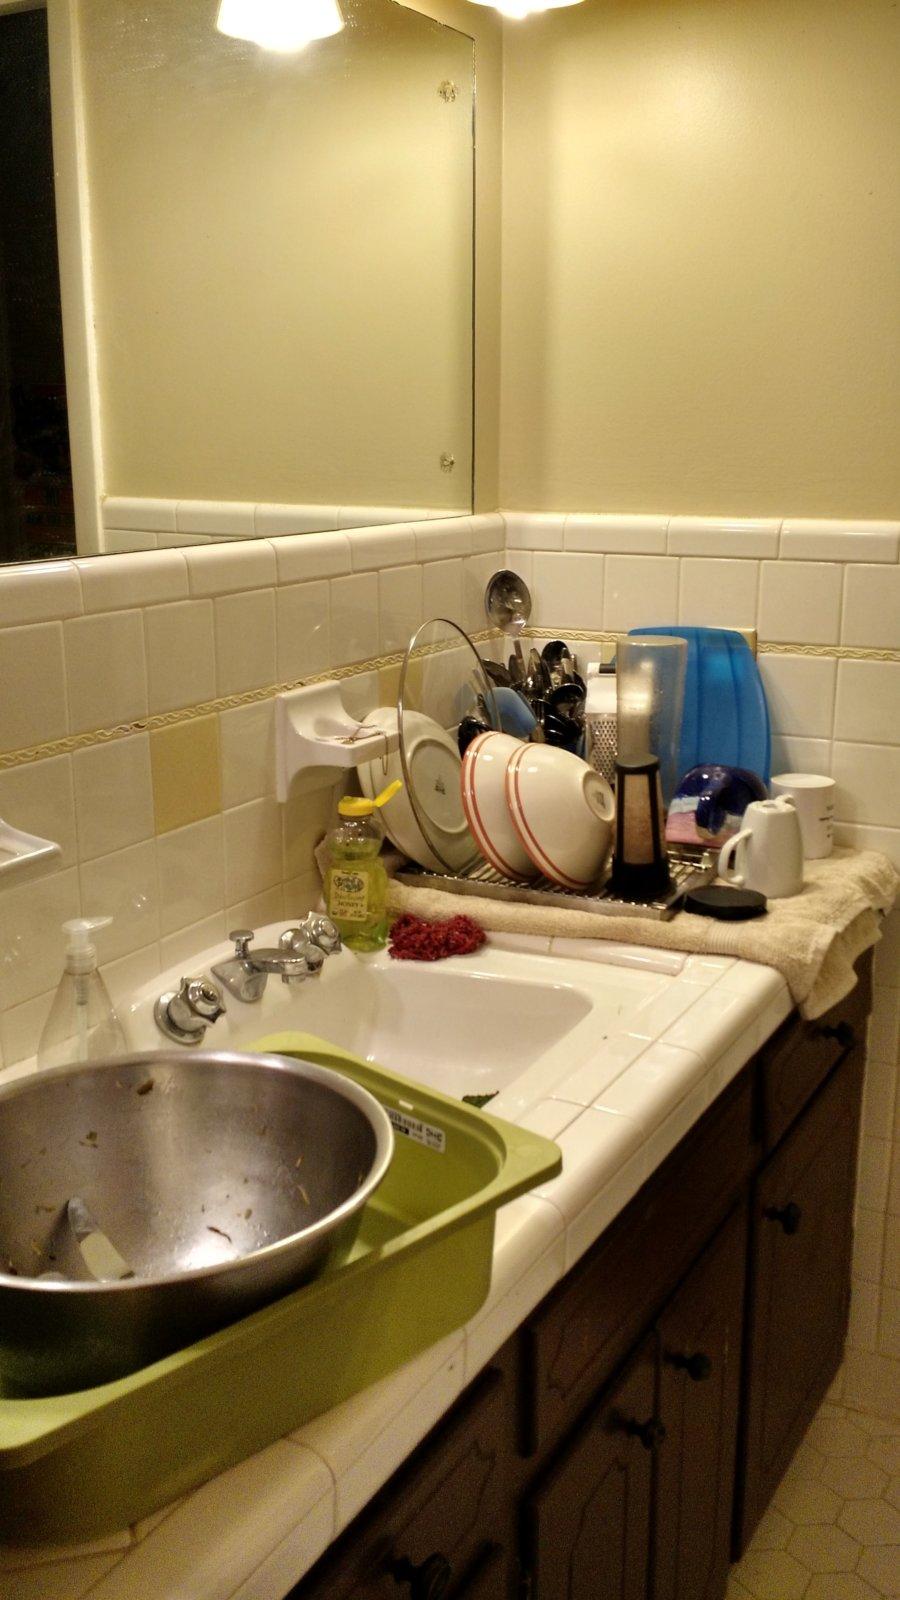 The bathroom has become the kitchen sink.